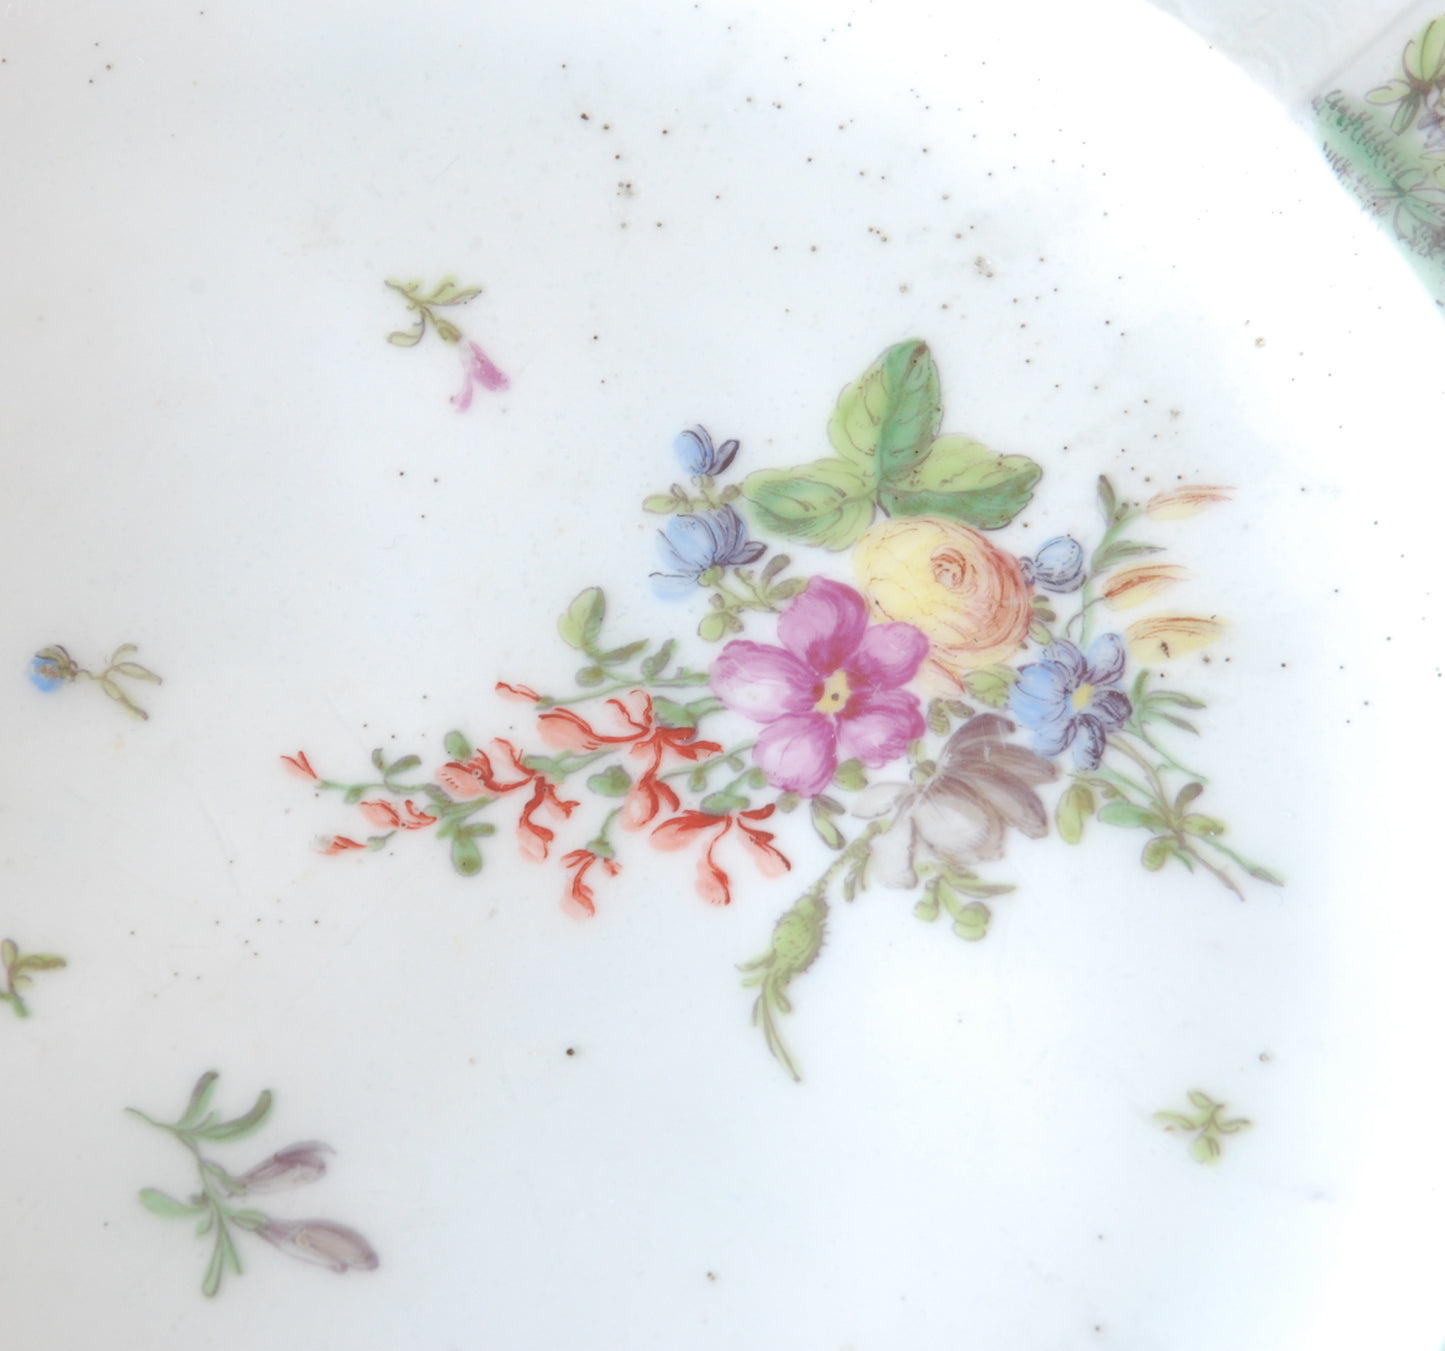 Pair plates, scalloped and flowers. Birds around the edge.